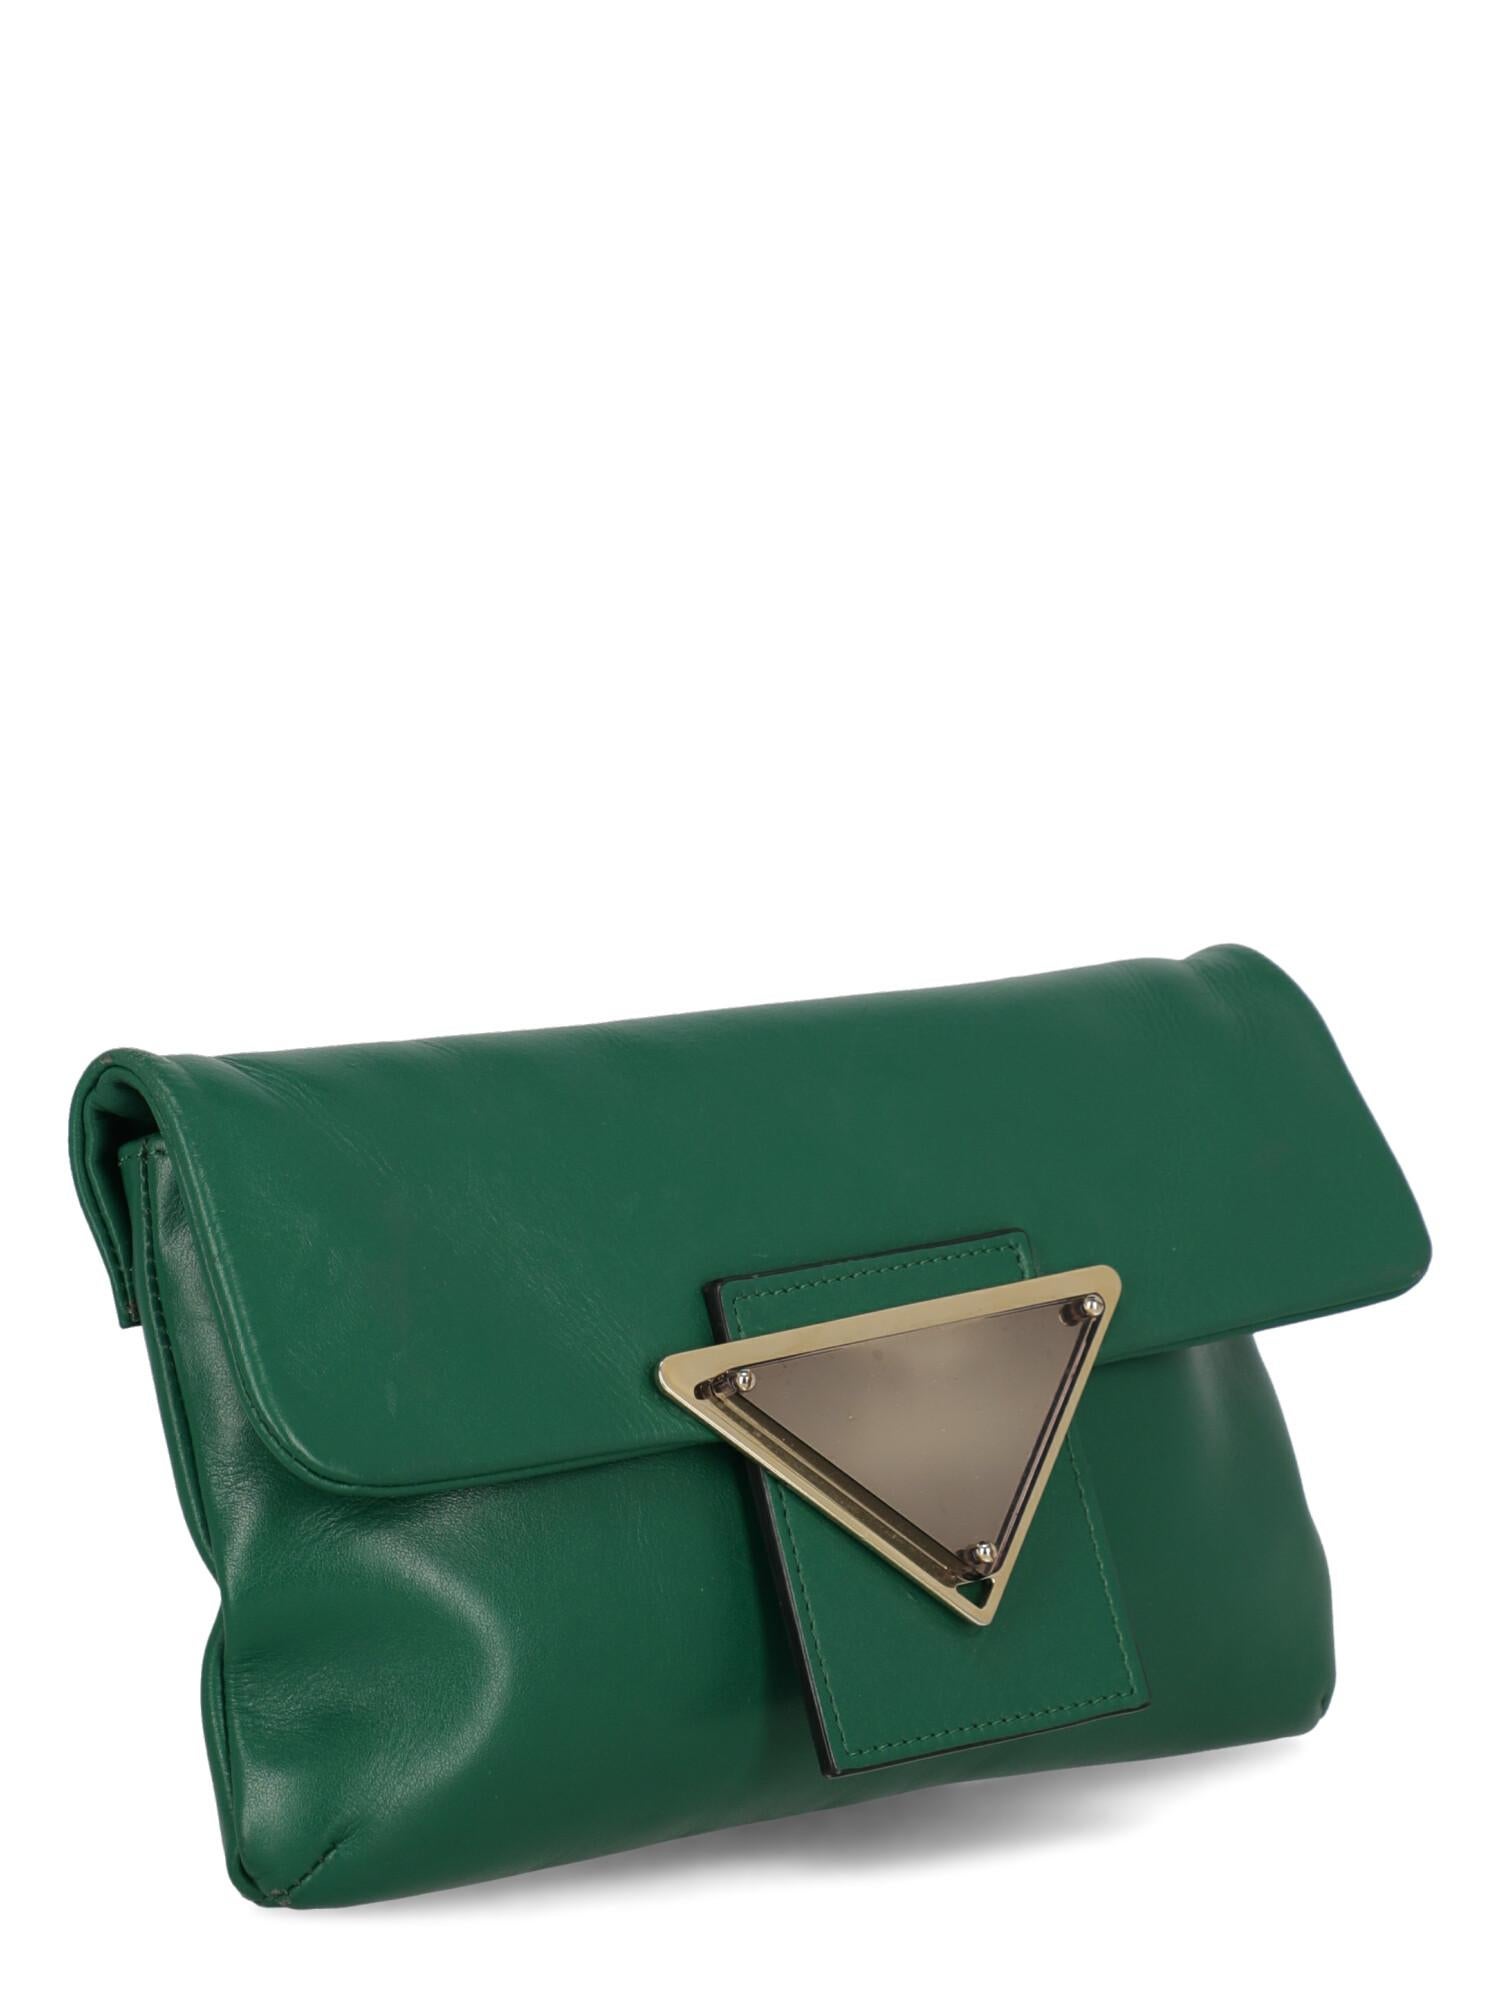 Sara Battaglia Woman Shoulder bag  Green Leather In Fair Condition For Sale In Milan, IT